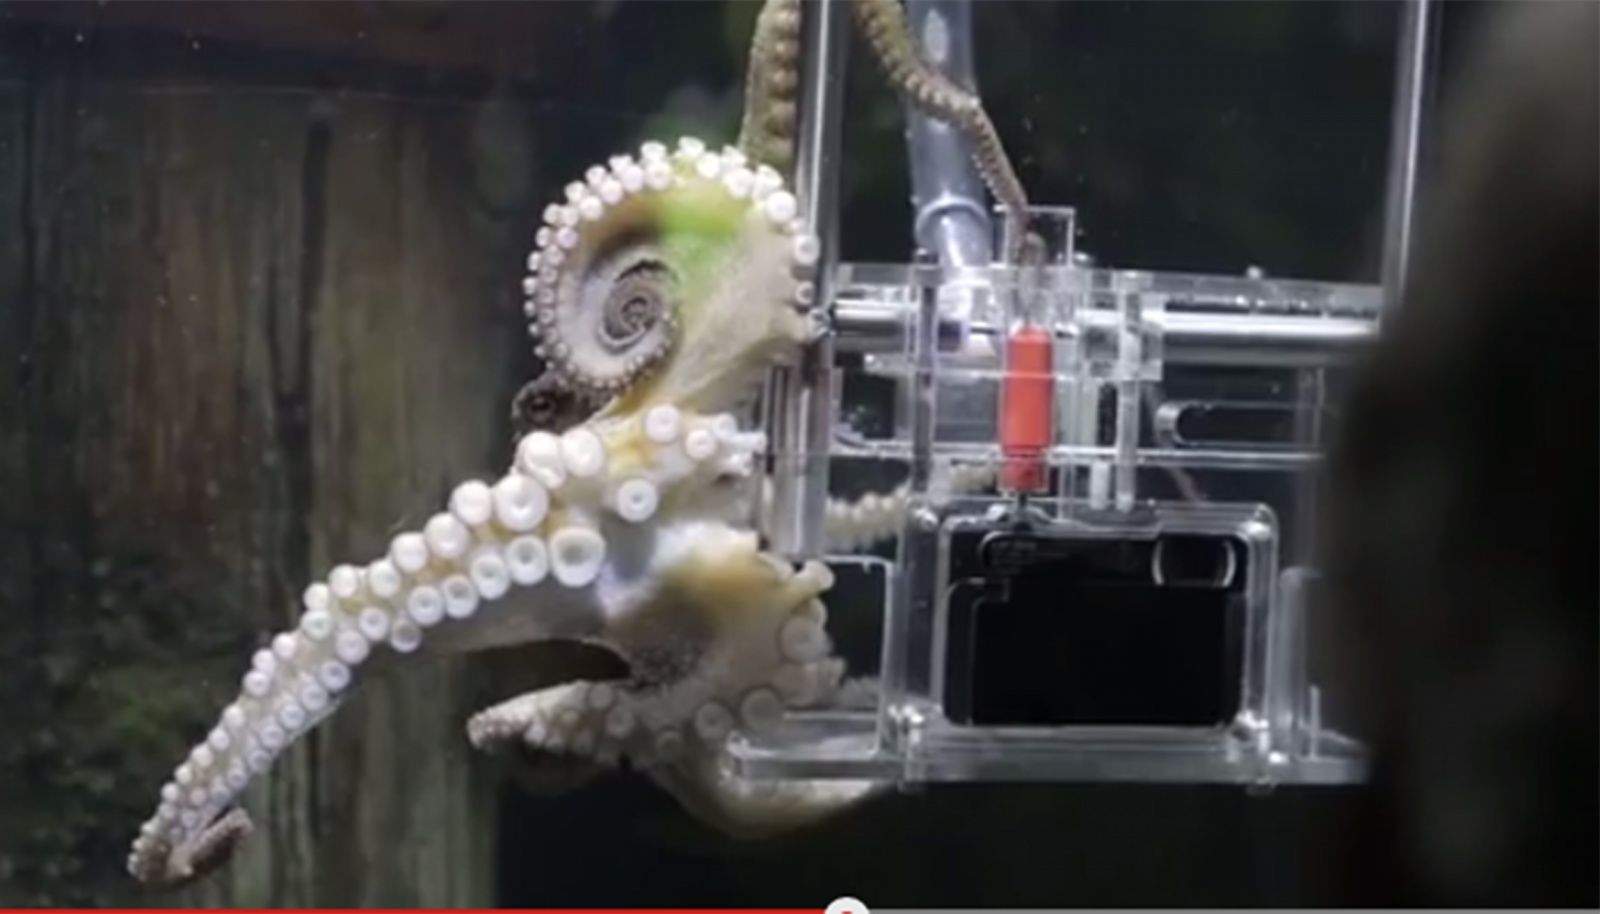 Rambo is an octopus that has been trained to photograph her visitors at an aquarium in New Zealand. Photo: Sony/YouTube